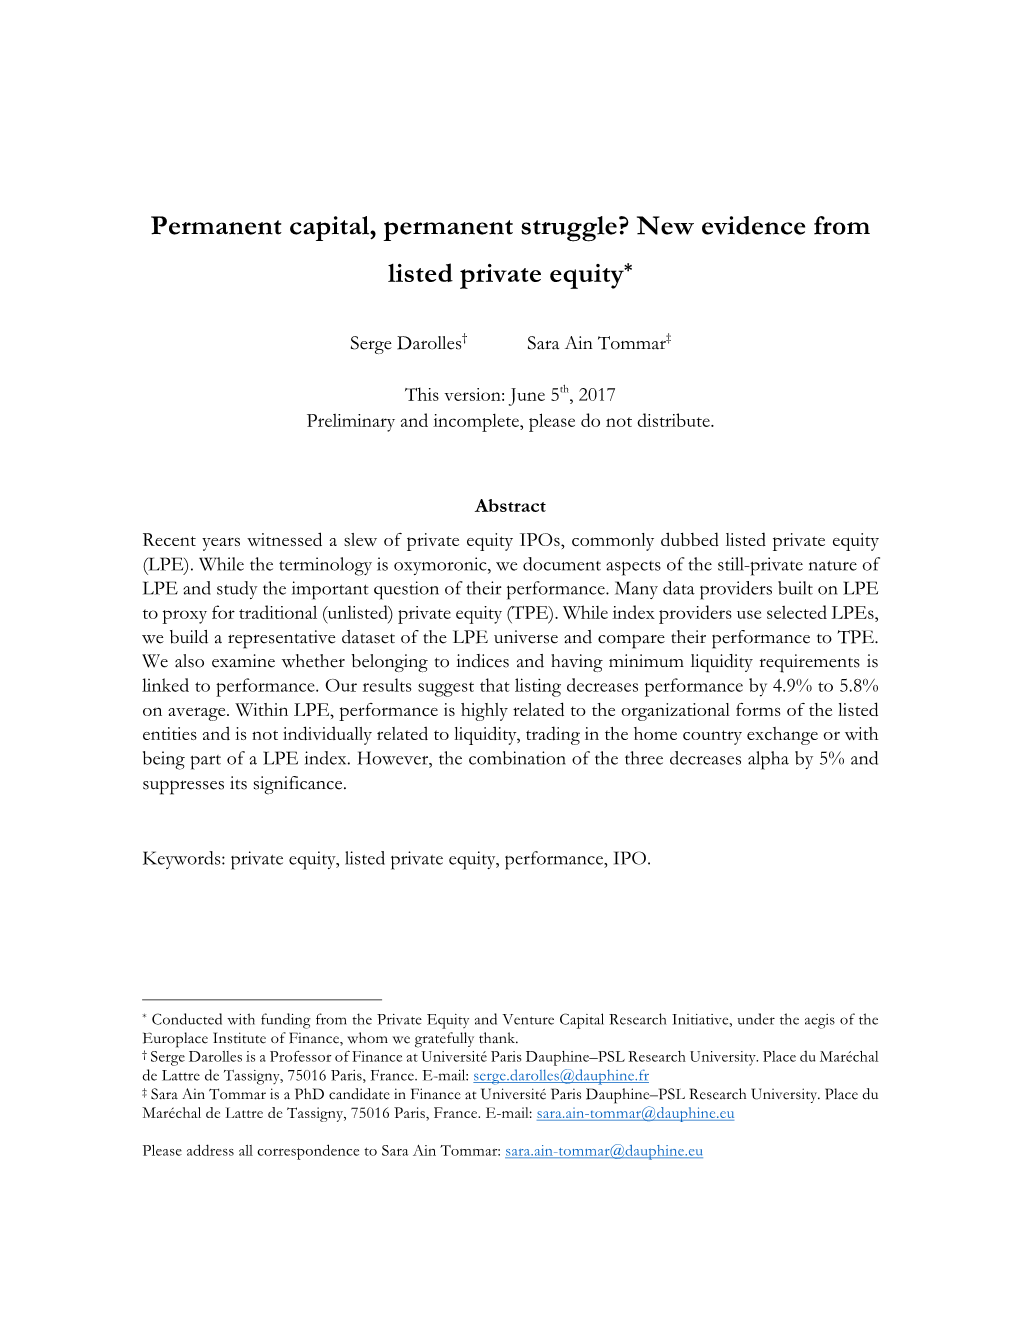 Permanent Capital, Permanent Struggle? New Evidence from Listed Private Equity*